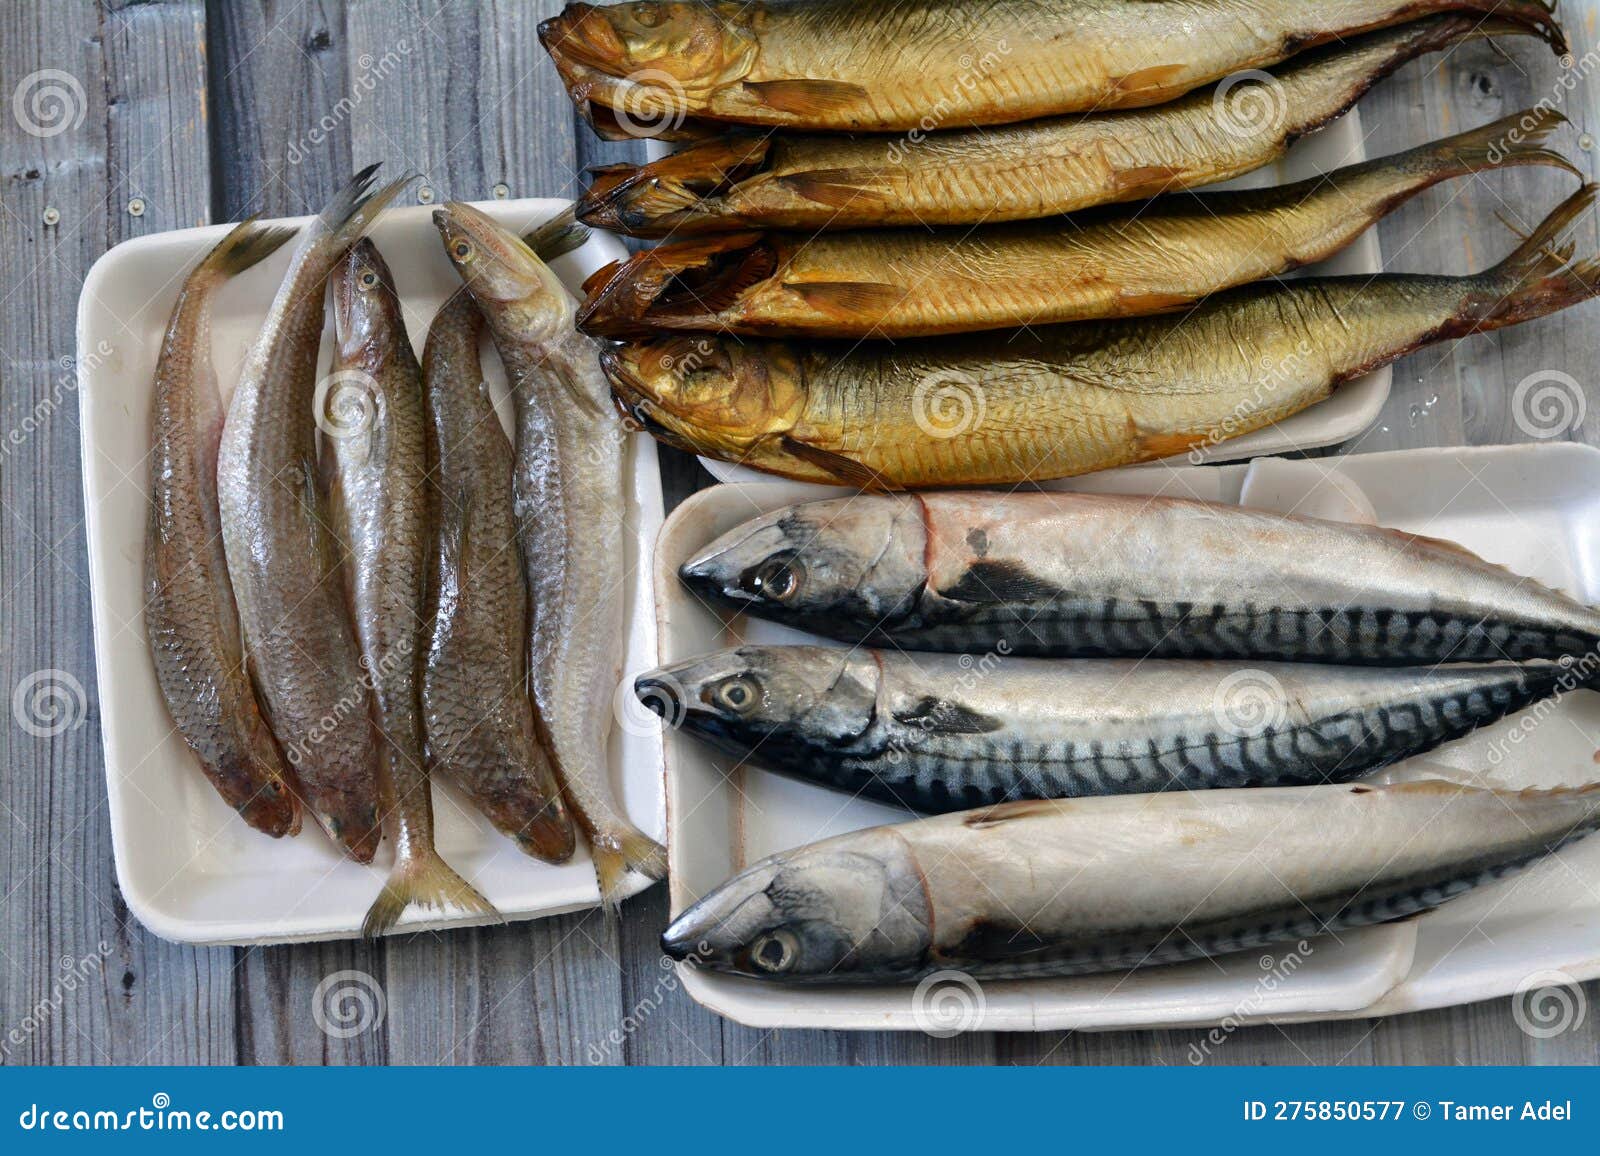 various types of raw fishes of mackerel fish, saurida undosquamis, the brushtooth lizardfish, large-scale grinner or largescale